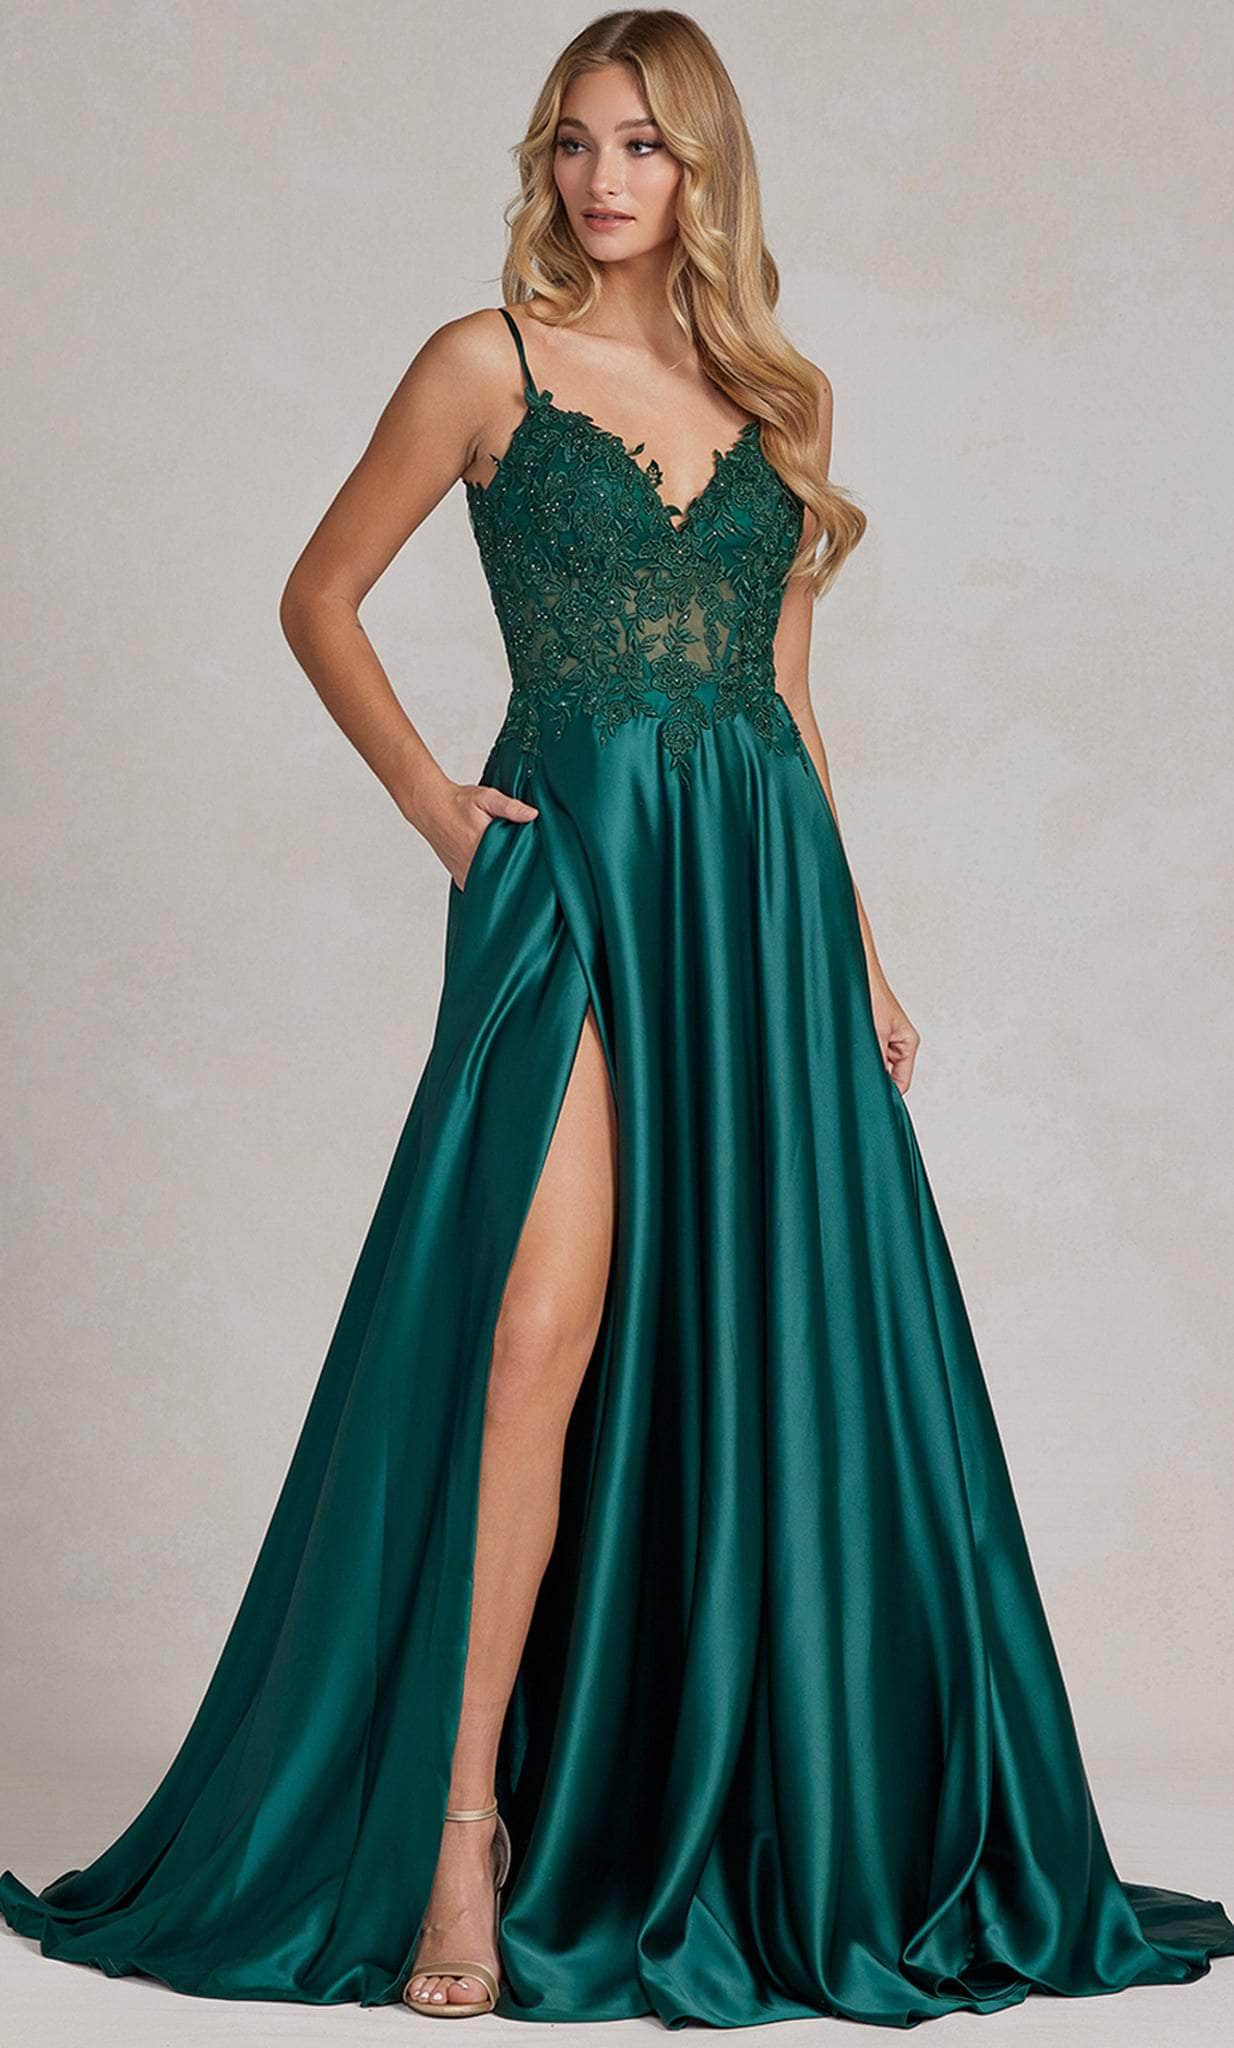 Image of Nox Anabel K1121 - Embroidered Sleeveless A-line Evening Gown